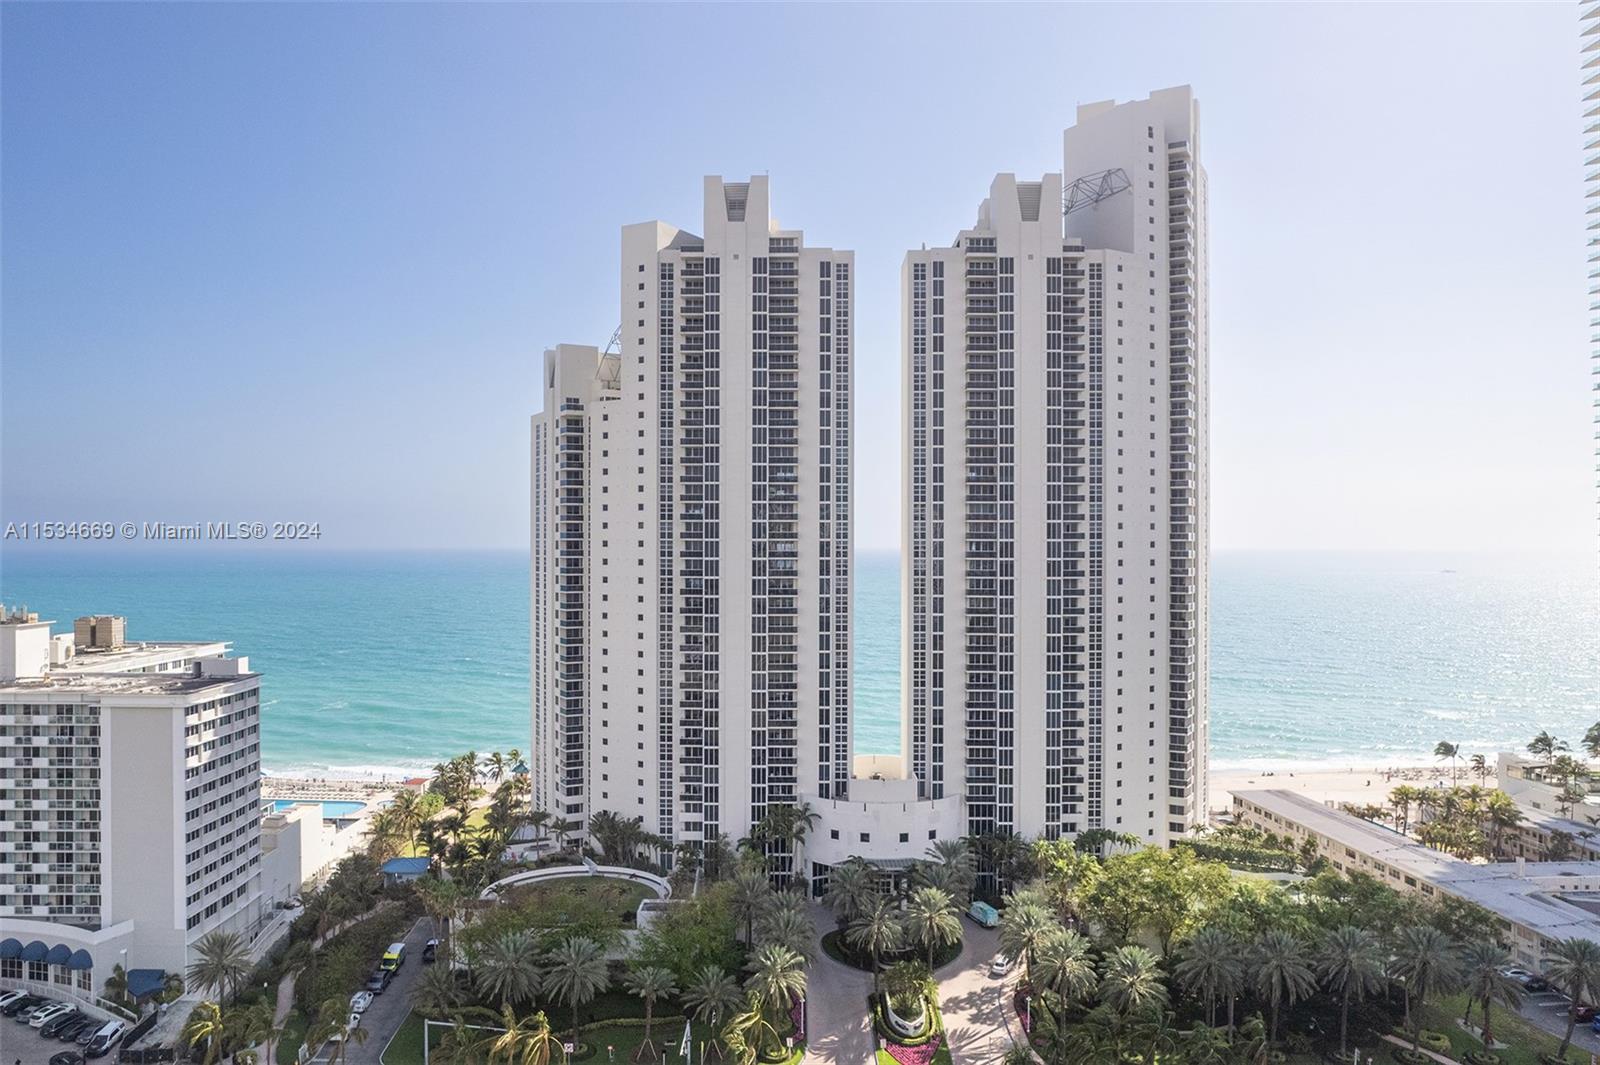 19111  Collins Ave #908 For Sale A11534669, FL